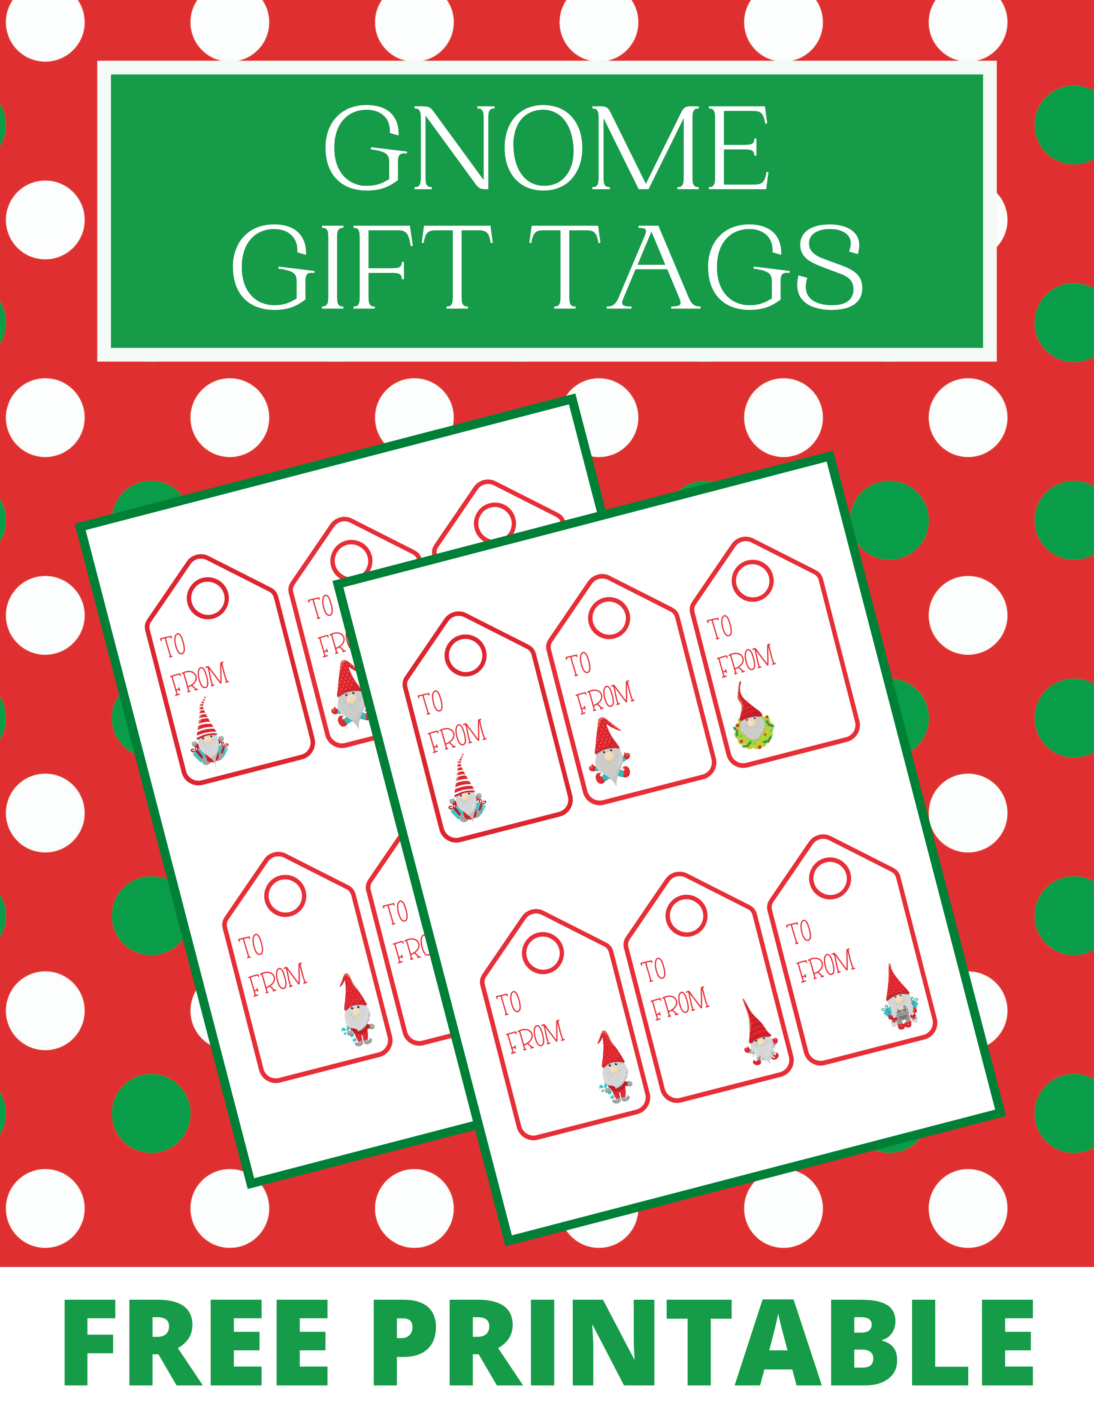 Free Printable Gnome Gift Tags - Outnumbered 3 to 1